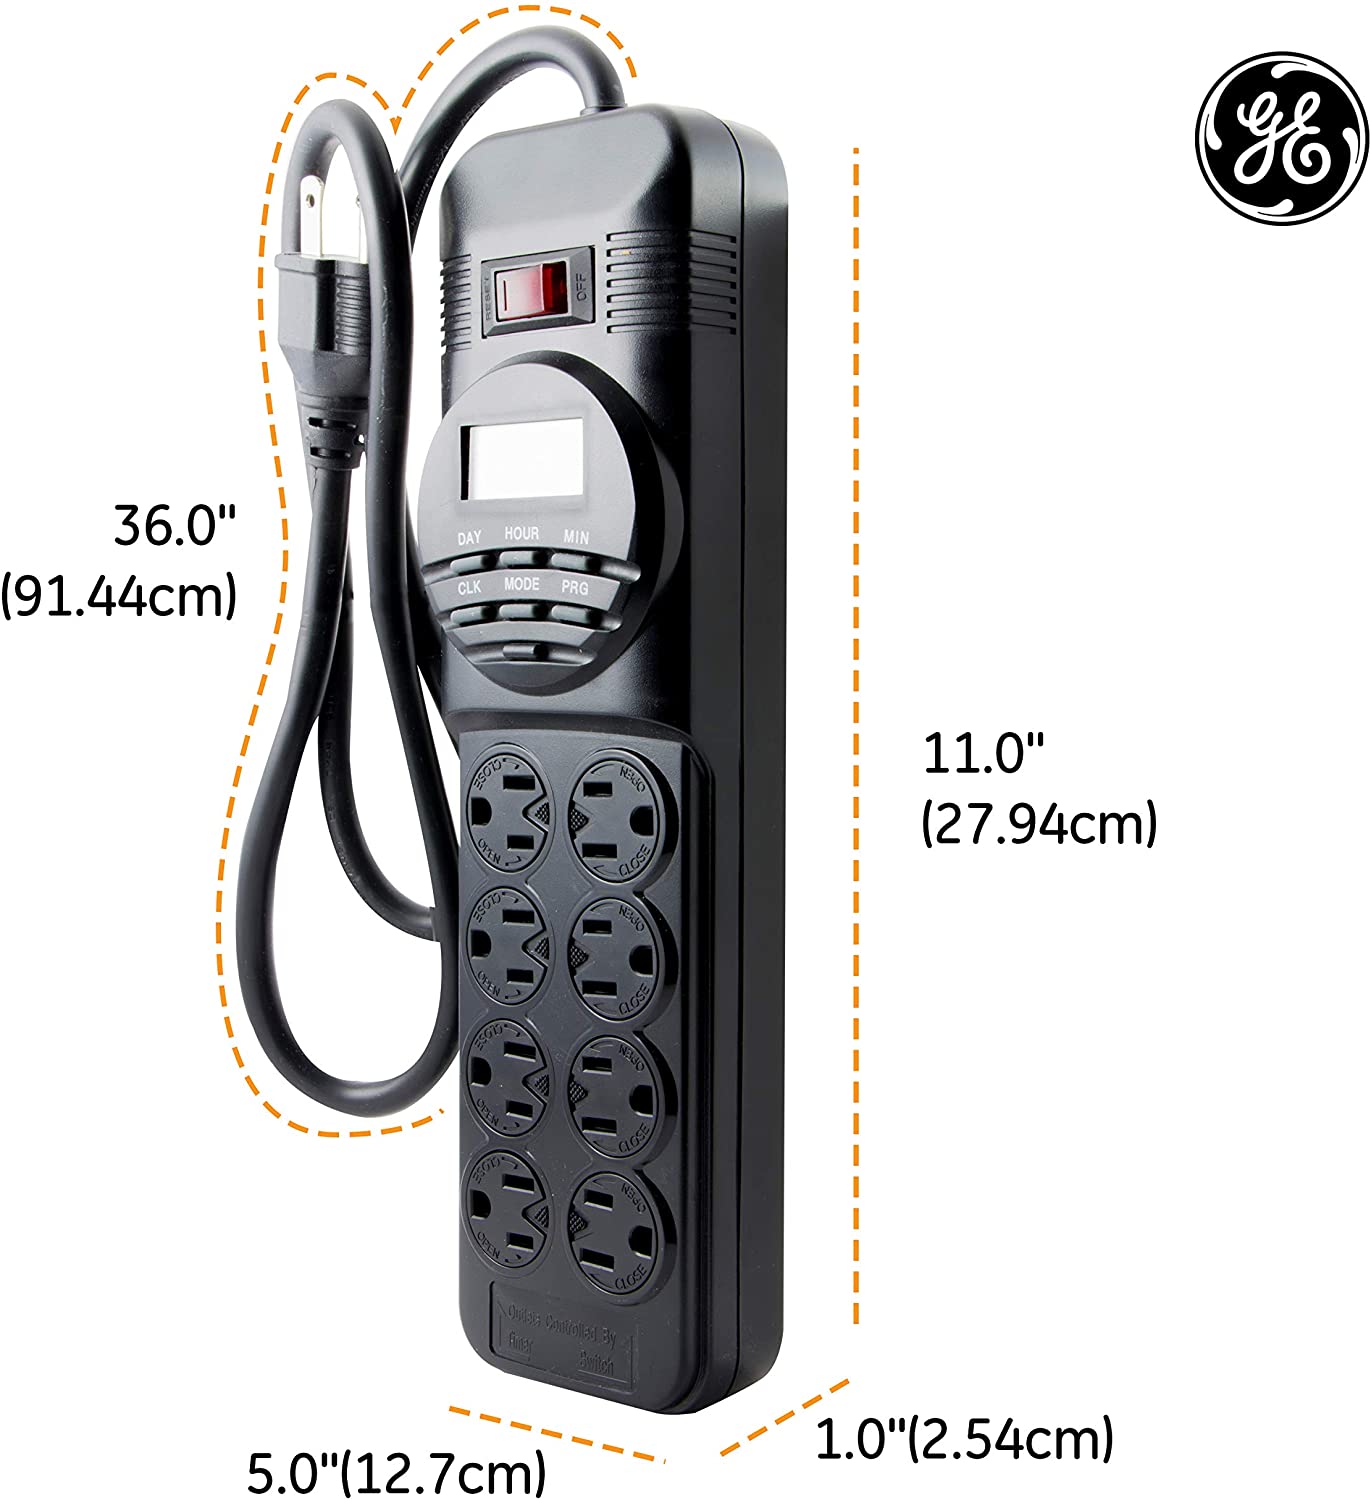 Coralife Digital Power Center 8 Outlet Power Strip 7 Time Cycle